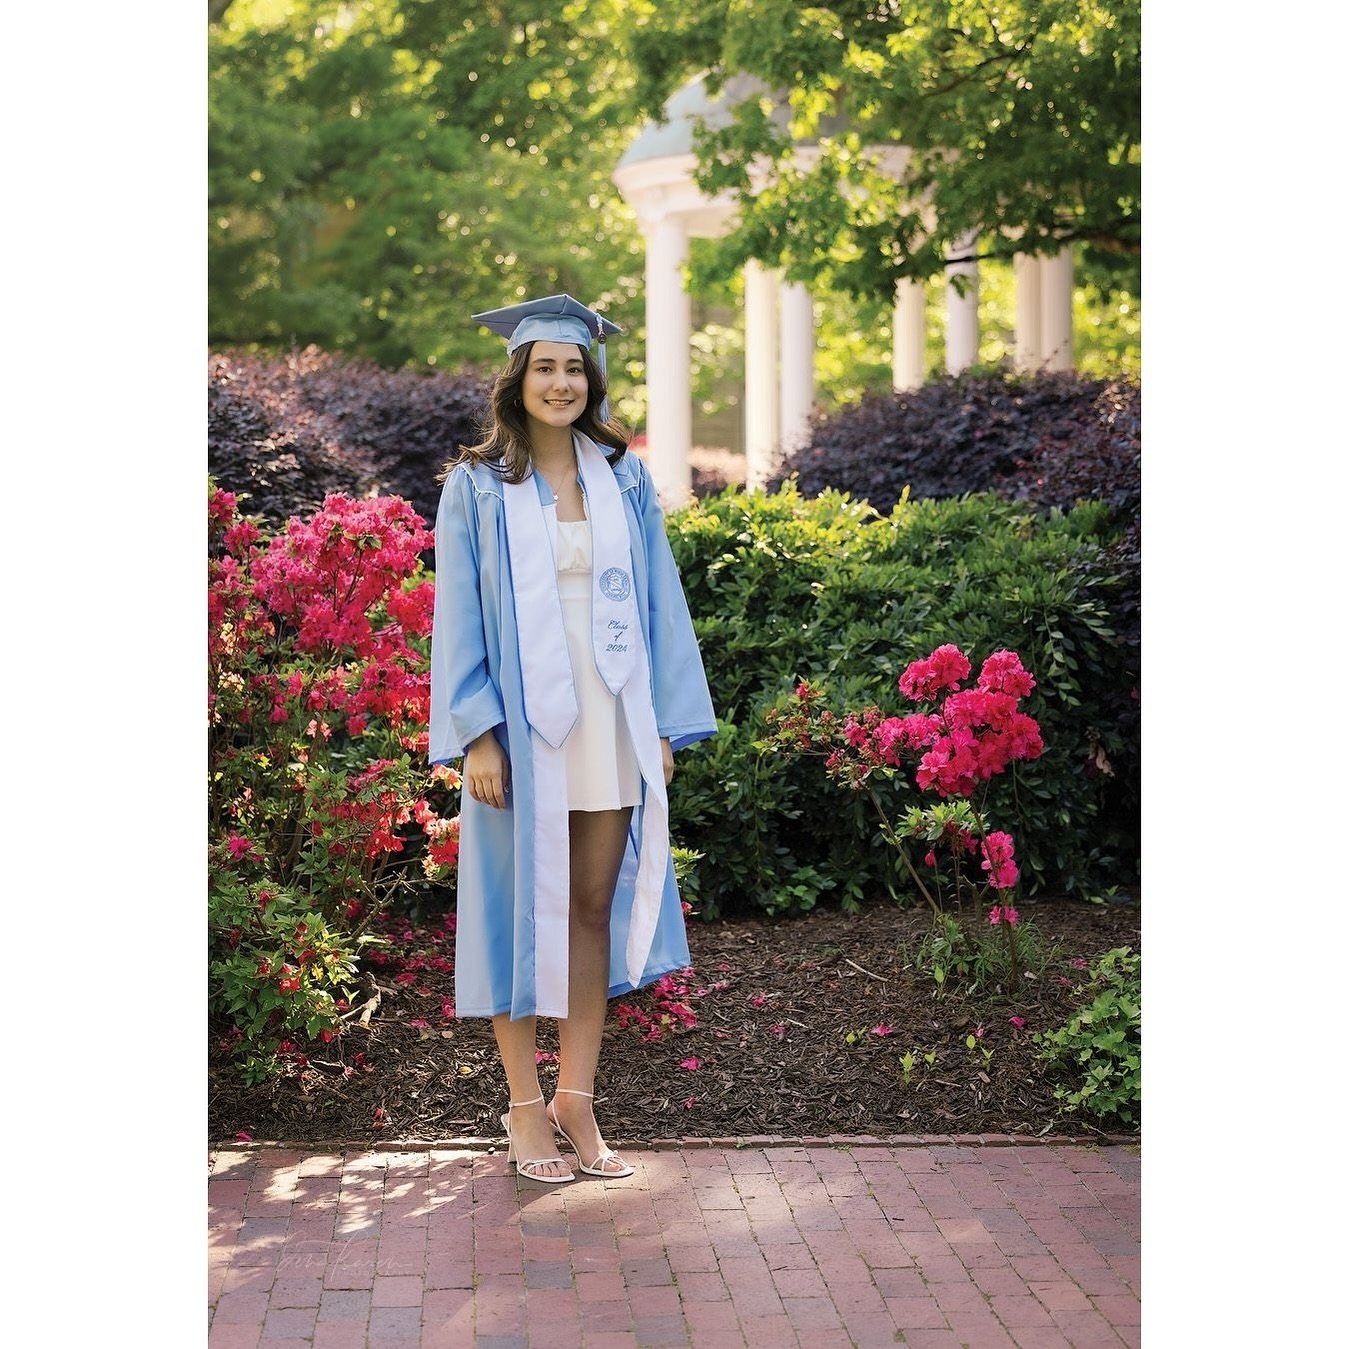 Cannot believe we are at this moment already !! So very proud of this young lady ❤️❤️ Phi Beta Kappa with degree in Bio and minor in Chem and Medical Anthropology&hellip; and she&rsquo;s just an awesome human :) ❤️❤️❤️ can&rsquo;t wait to see what he